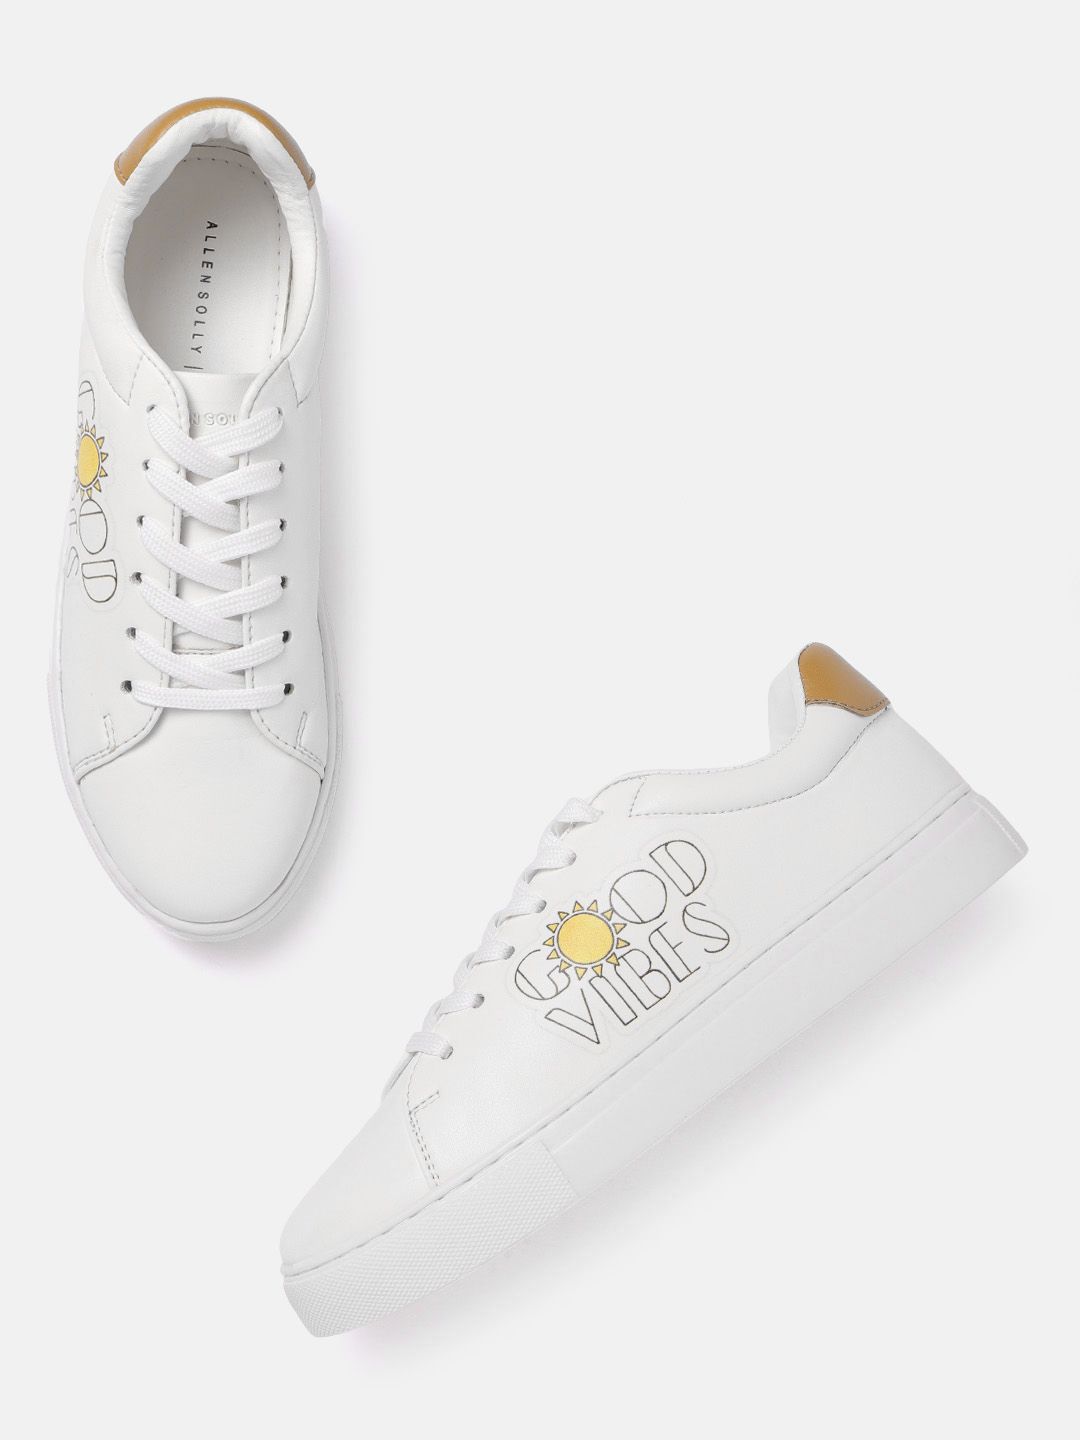 Allen Solly Women White Solid Sneakers with Printed Detail Price in India